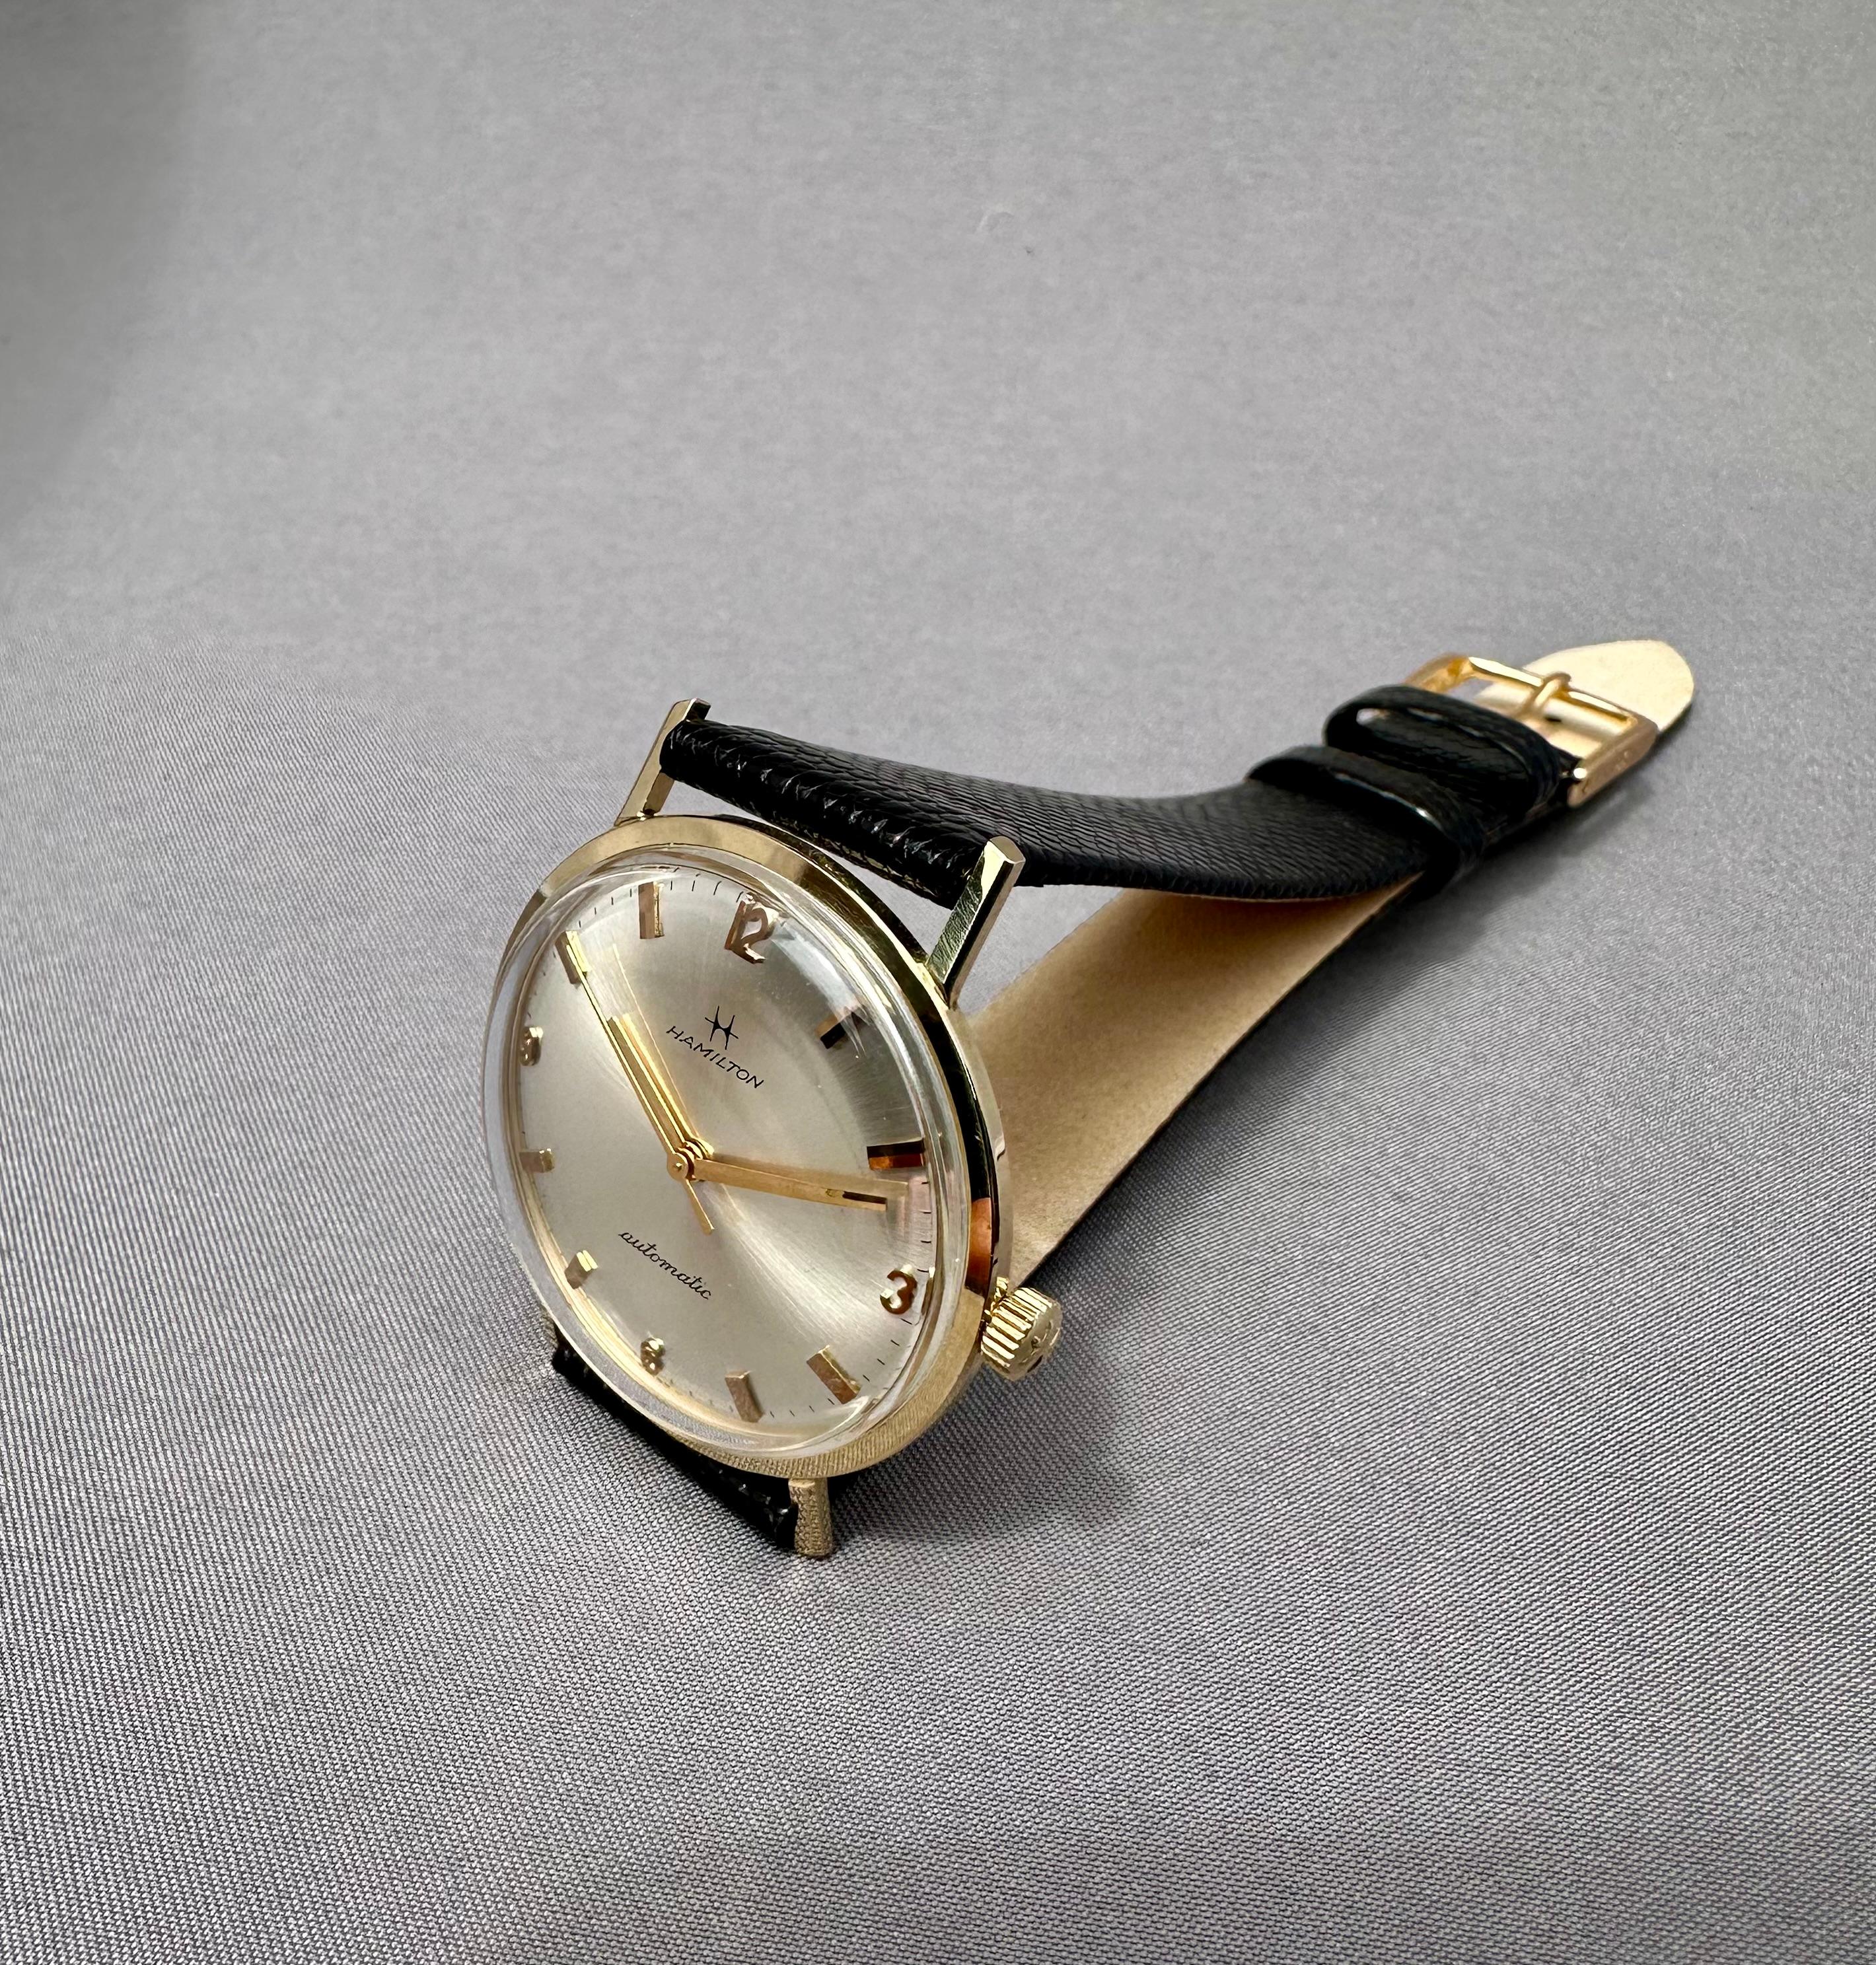 Vintage Hamilton Silver Dial 14k Solid Gold Automatic Watch - 1970's

Description / Condition: All watches have been professionally scrutinized and serviced prior to being offered for sale. 

Manufacturer: Hamilton

Model: Hamilton Classic

Year of